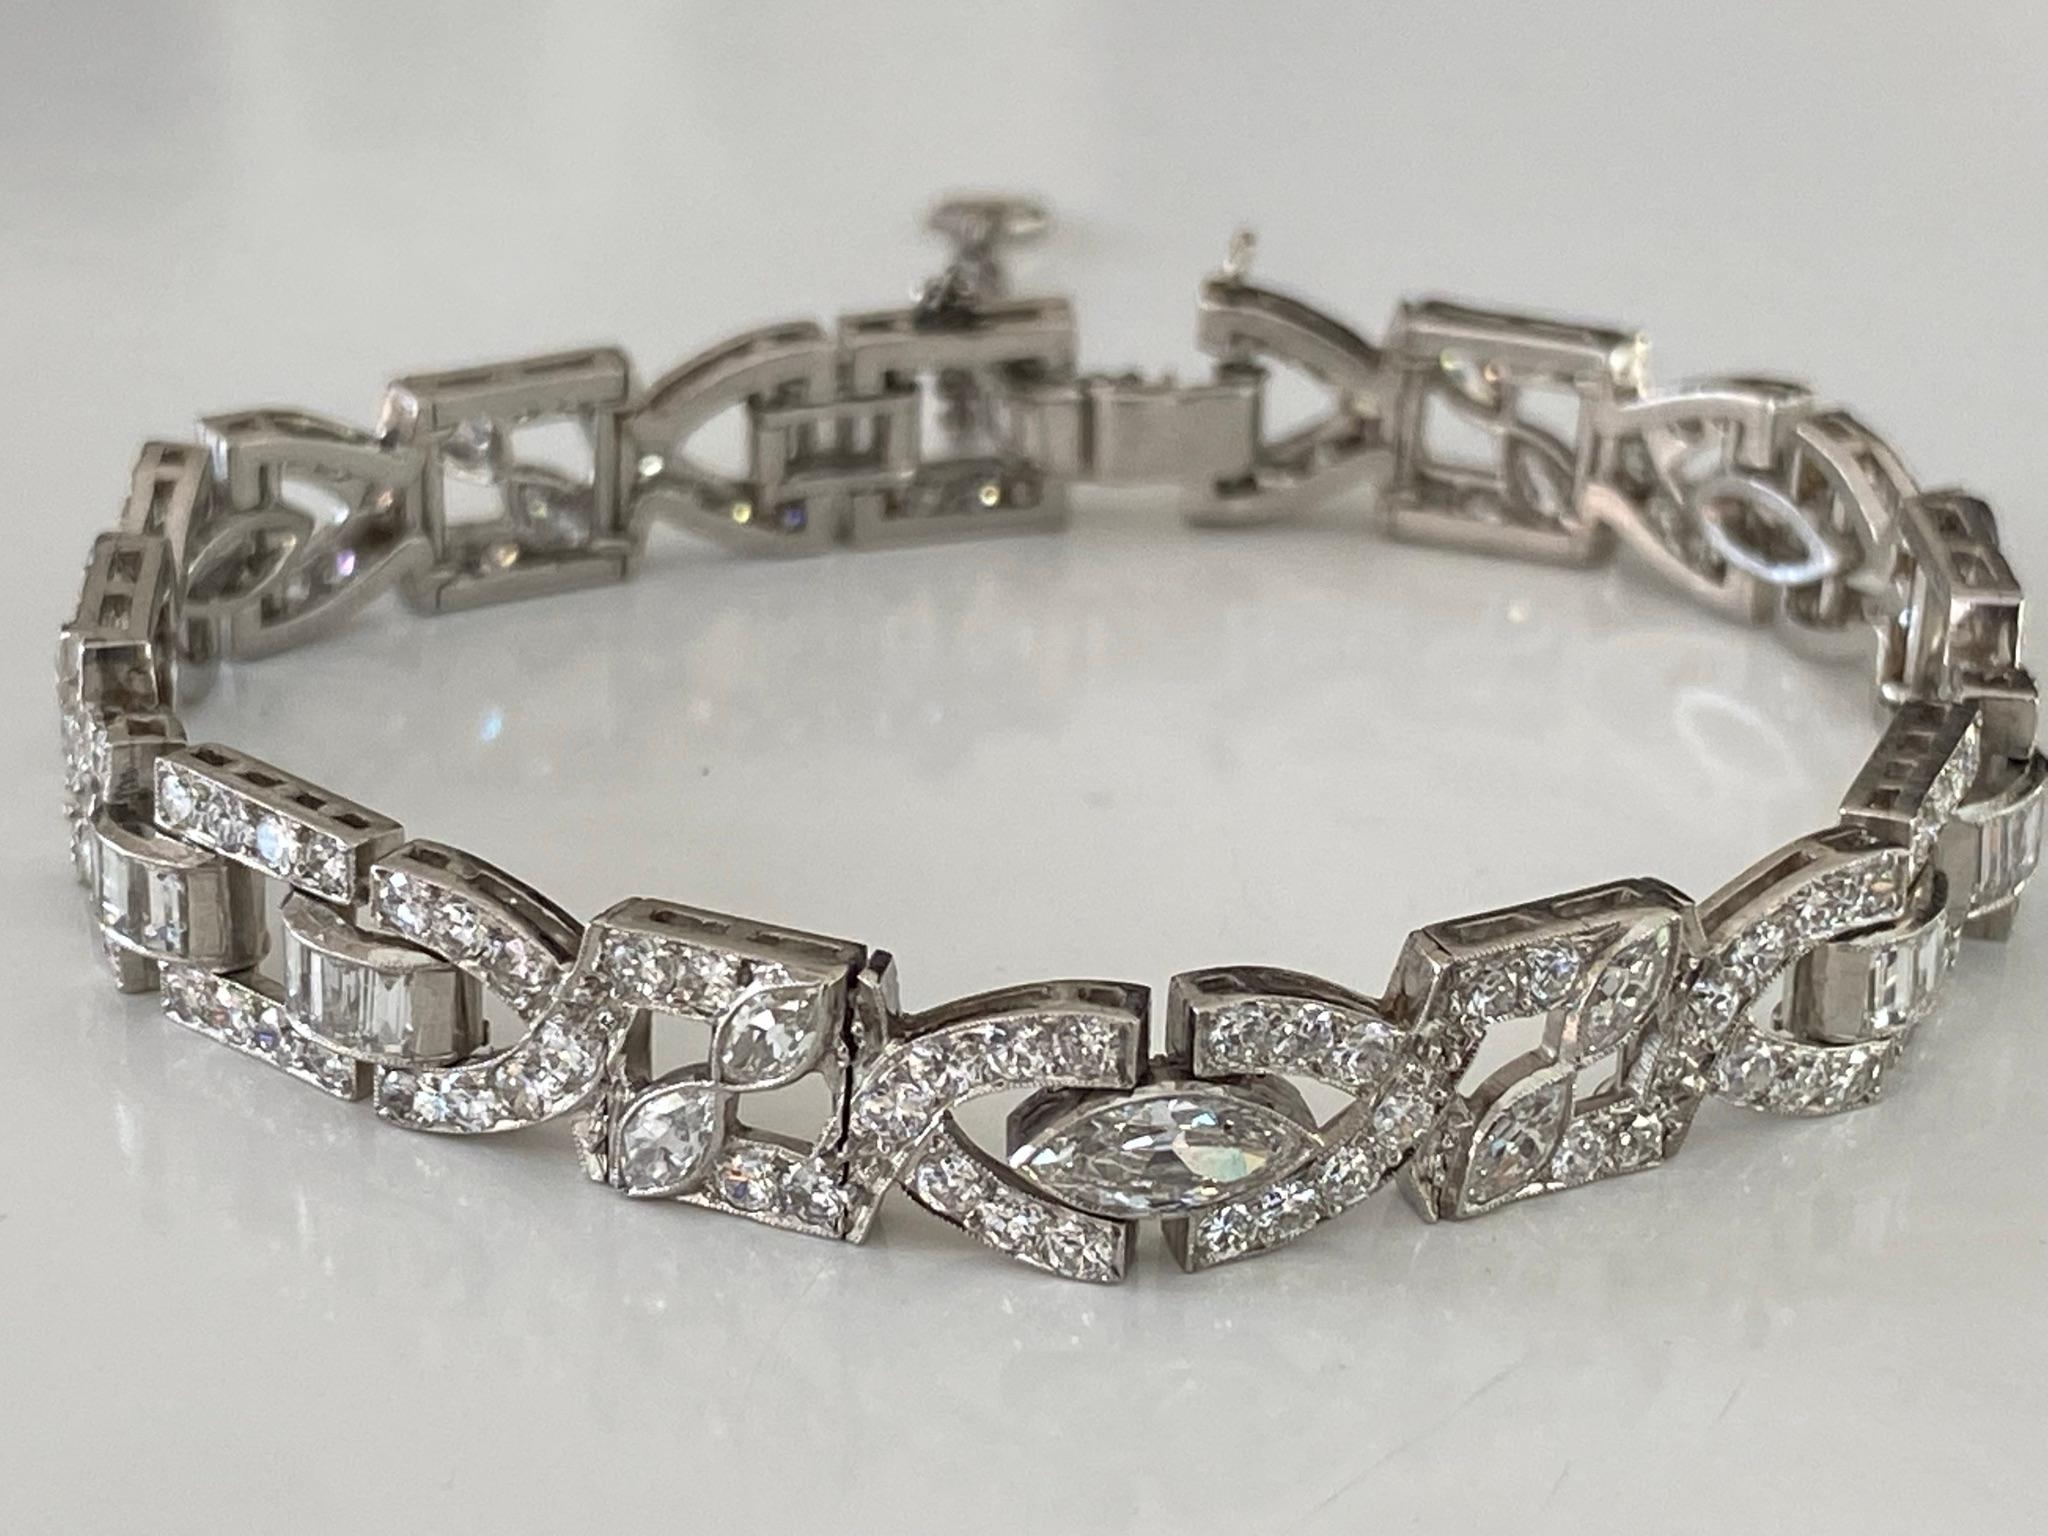 This dazzling Art Deco link bracelet fashioned in platinum is designed around a sparkling array of Old European cut, marquise and baguette diamonds with delicate milgraining throughout. The total diamond weight measures 7.50 carats, G-H color, VS